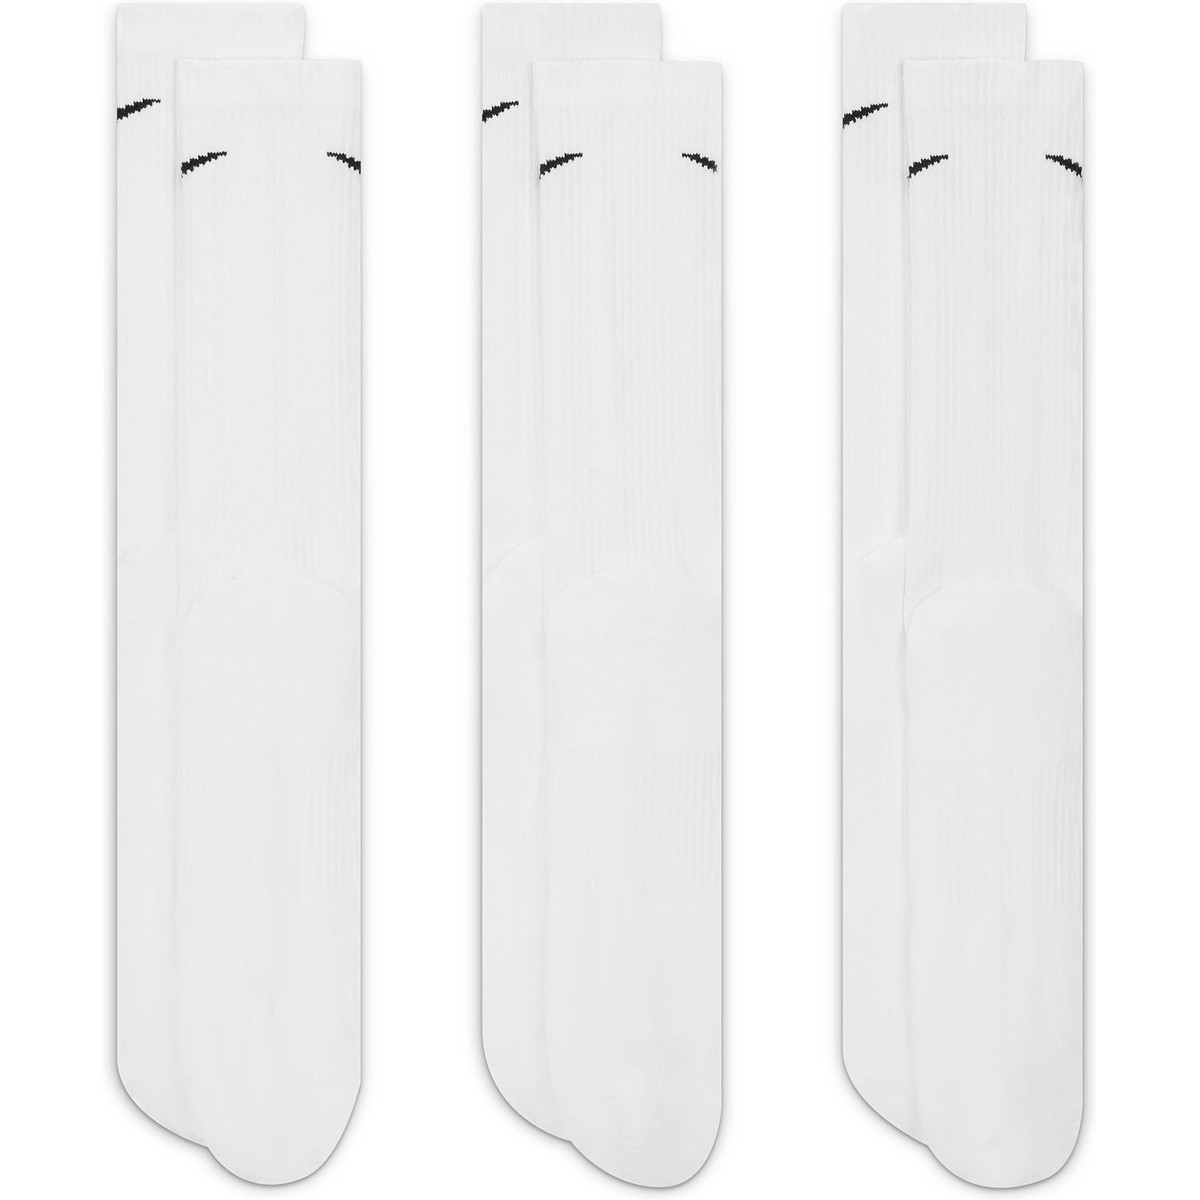 Calcetines tobilleros Nike Max Cushioned 3 pares blancos